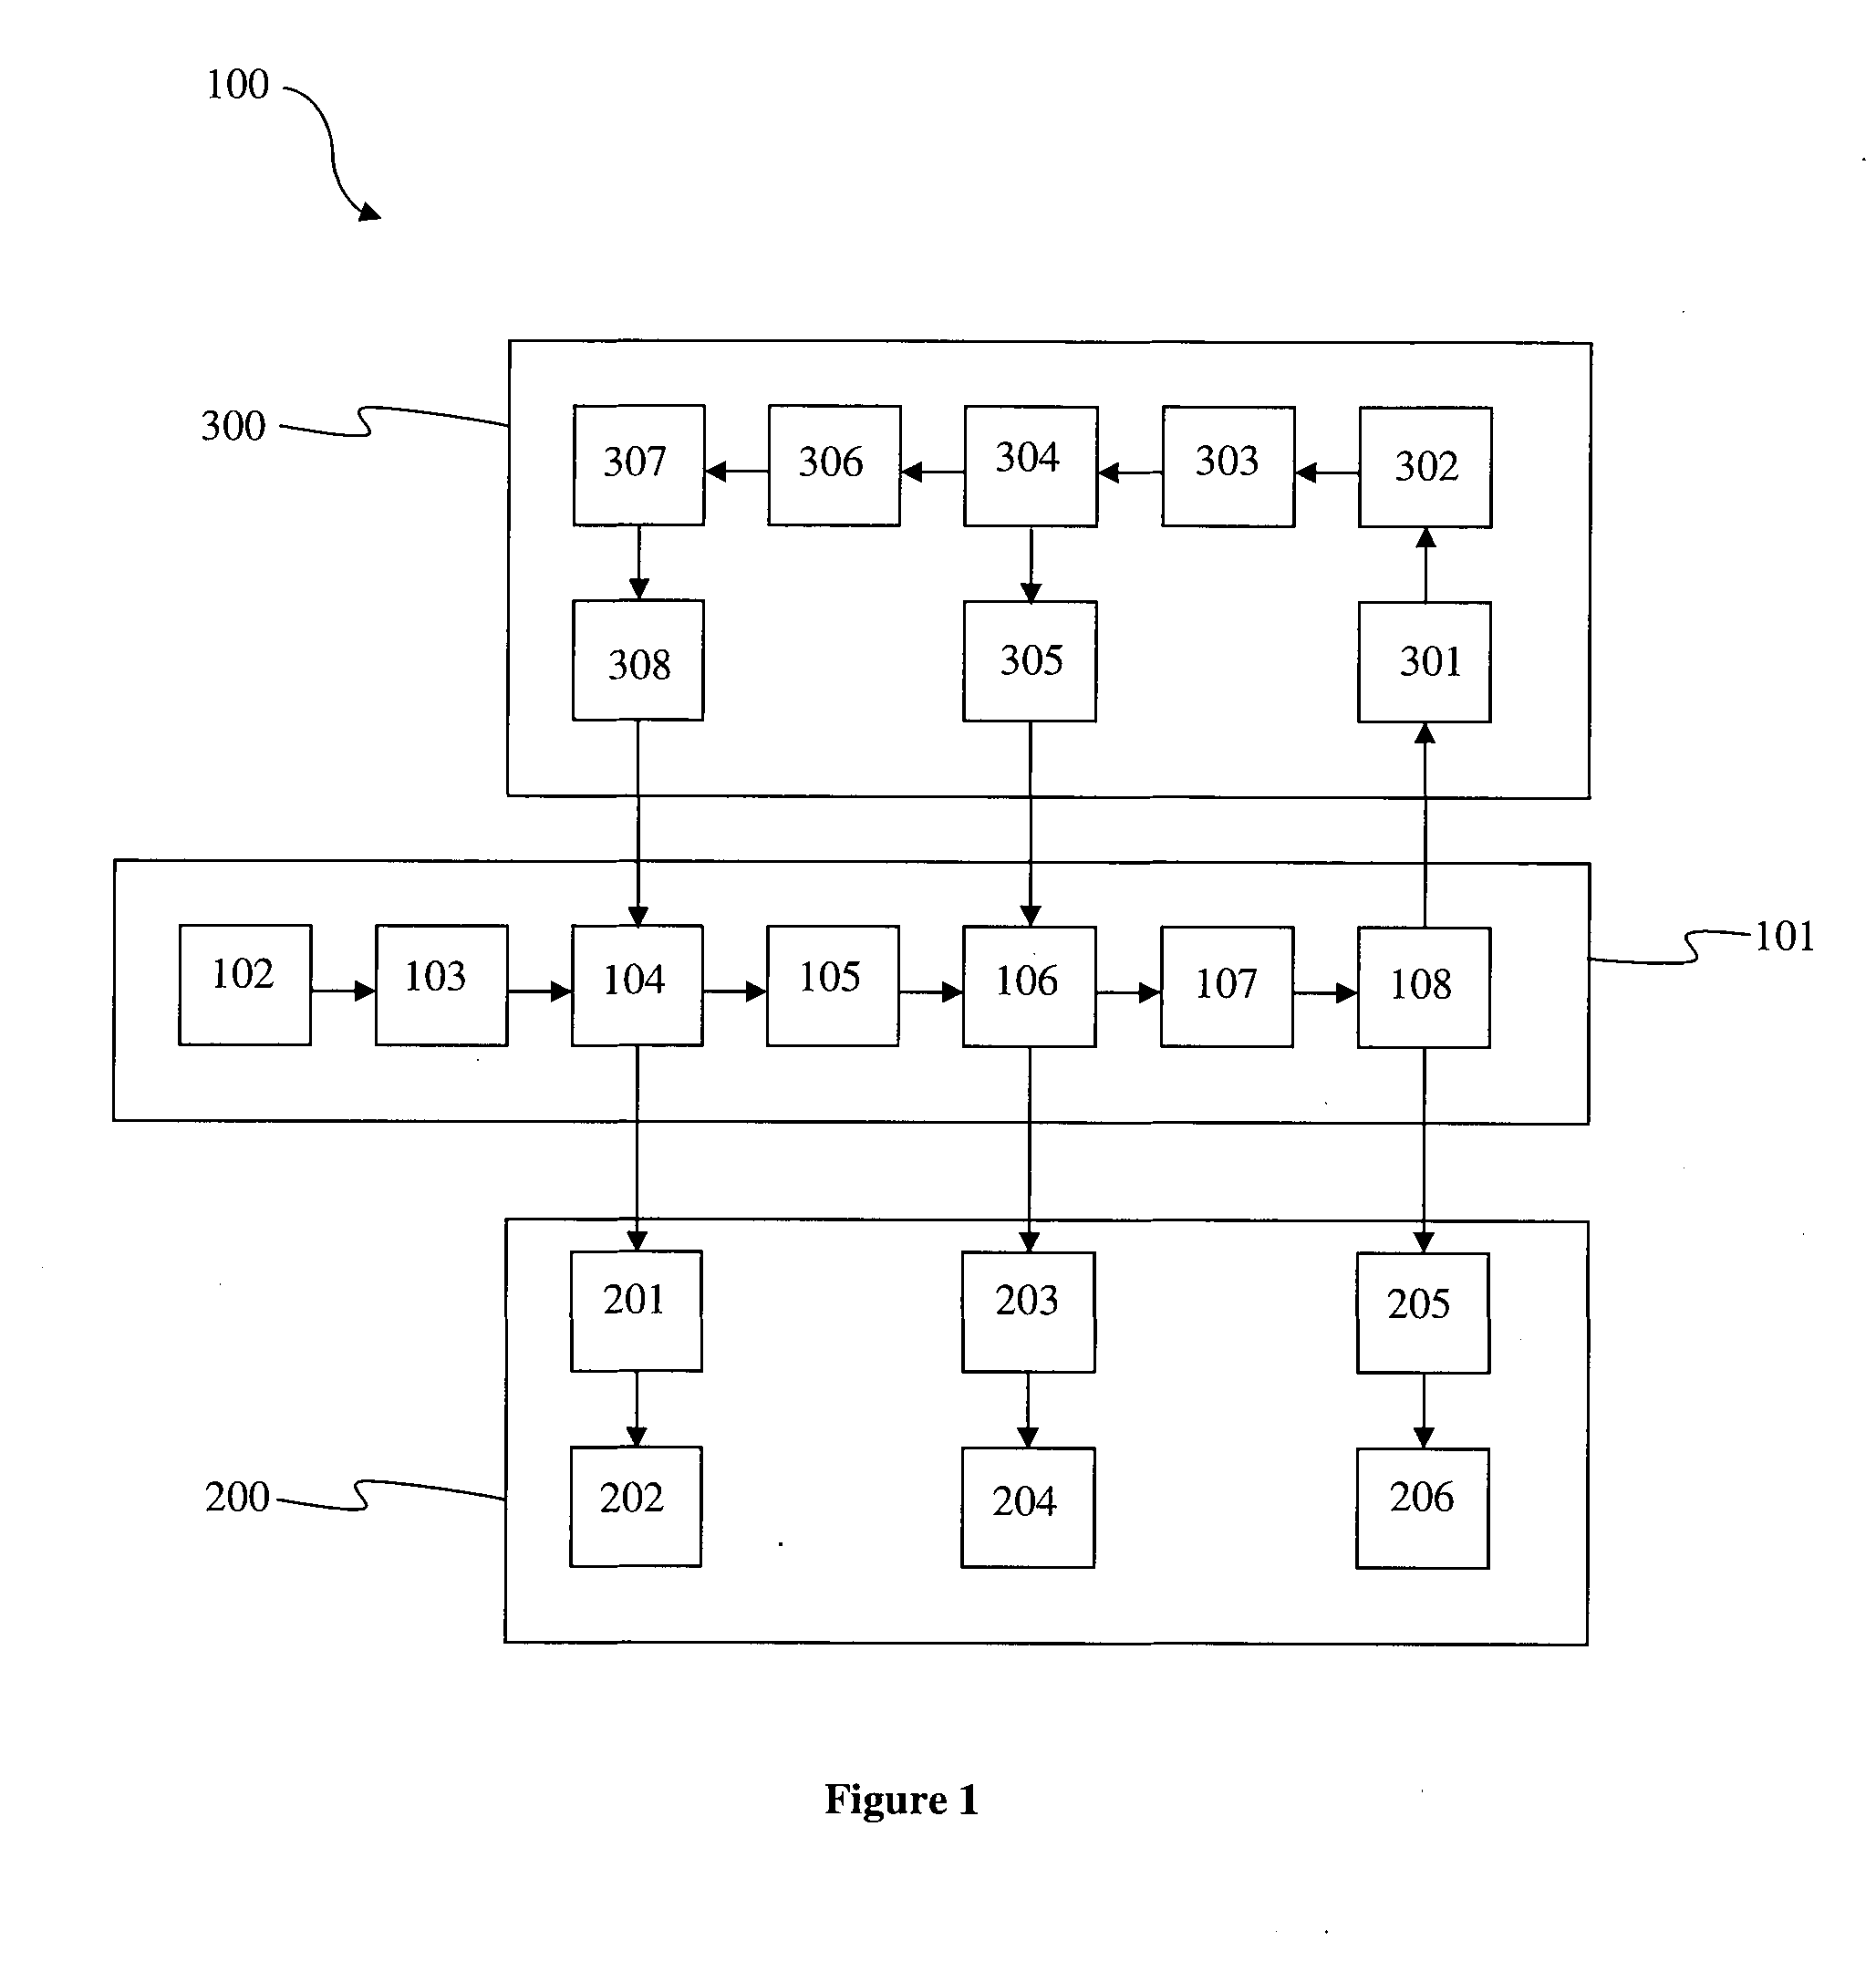 Method for pseudo-recurrent processing of data using a feedforward neural network architecture